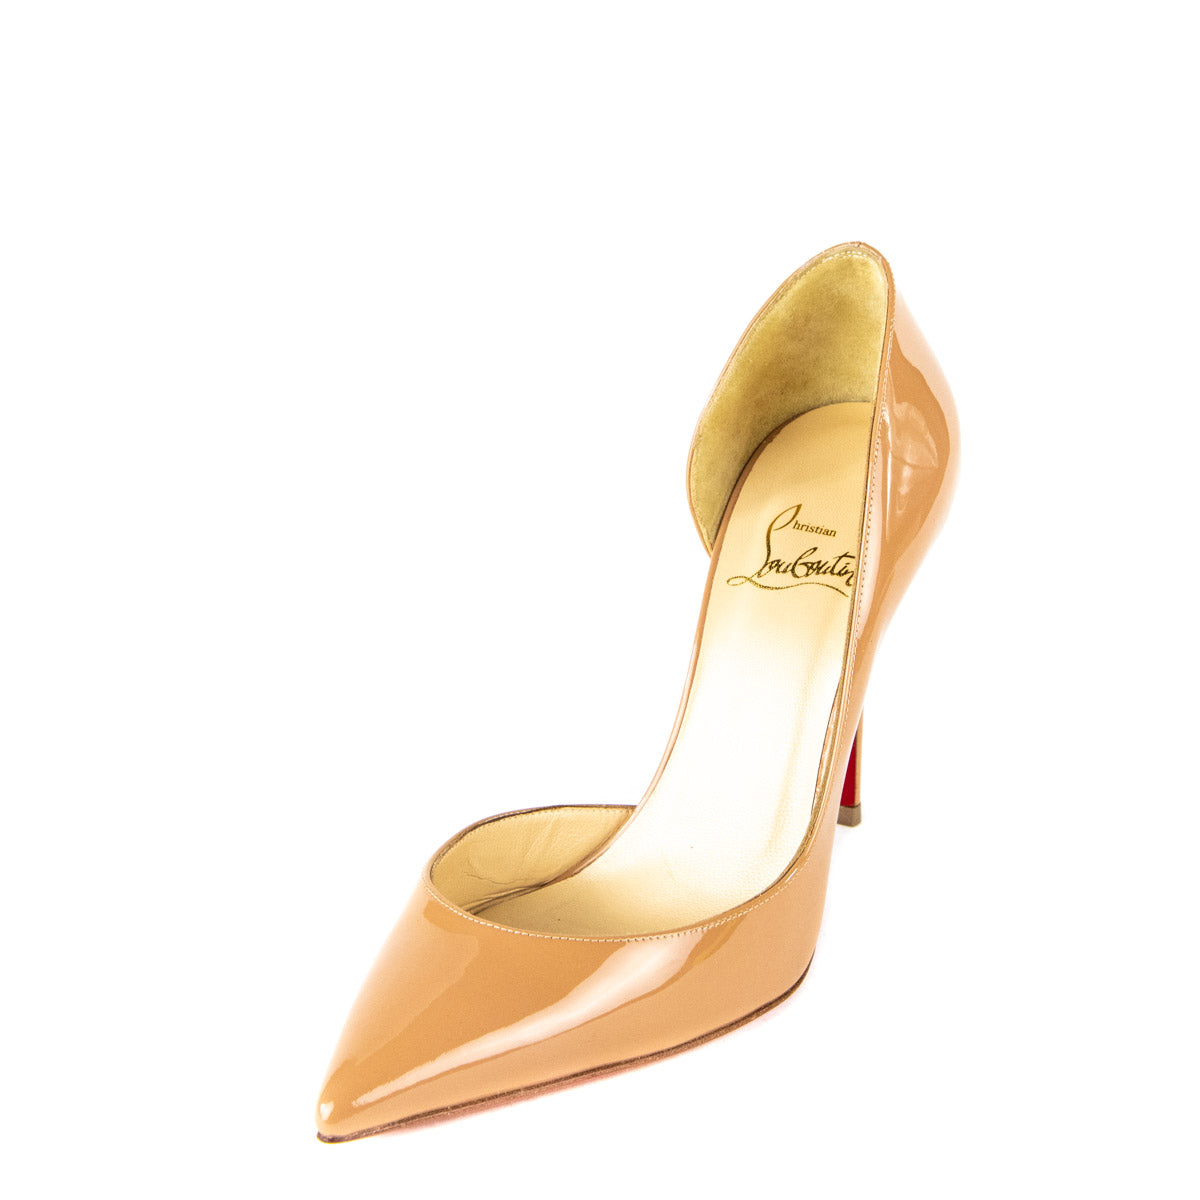 Christian Louboutin Nude Patent Leather 